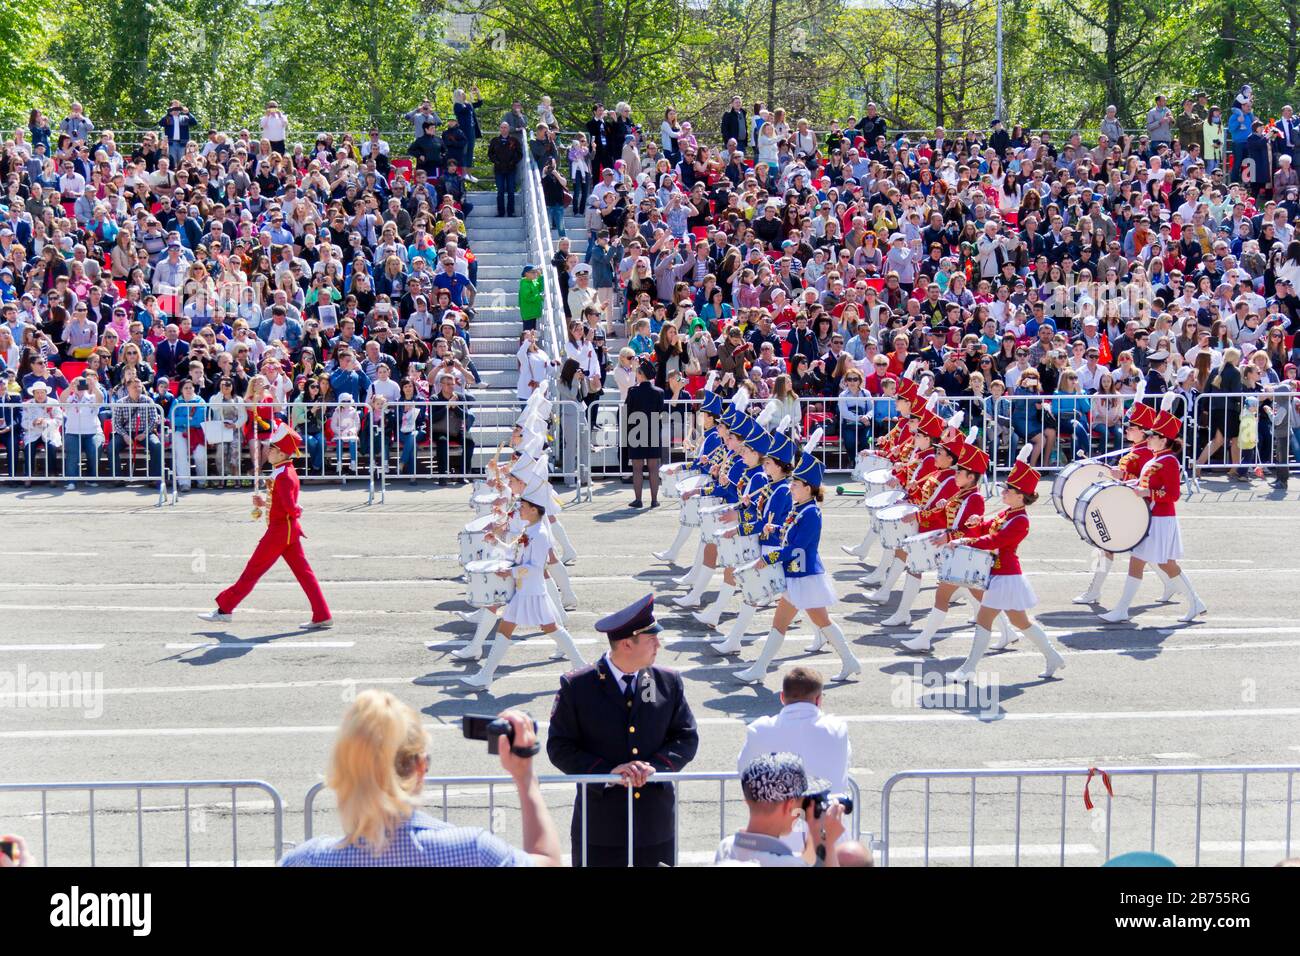 SAMARA, RUSSIA - MAY 9, 2016: Russian military women orchestra march at the parade on annual Victory Day, May, 9, 2016 in Samara, Russia Stock Photo